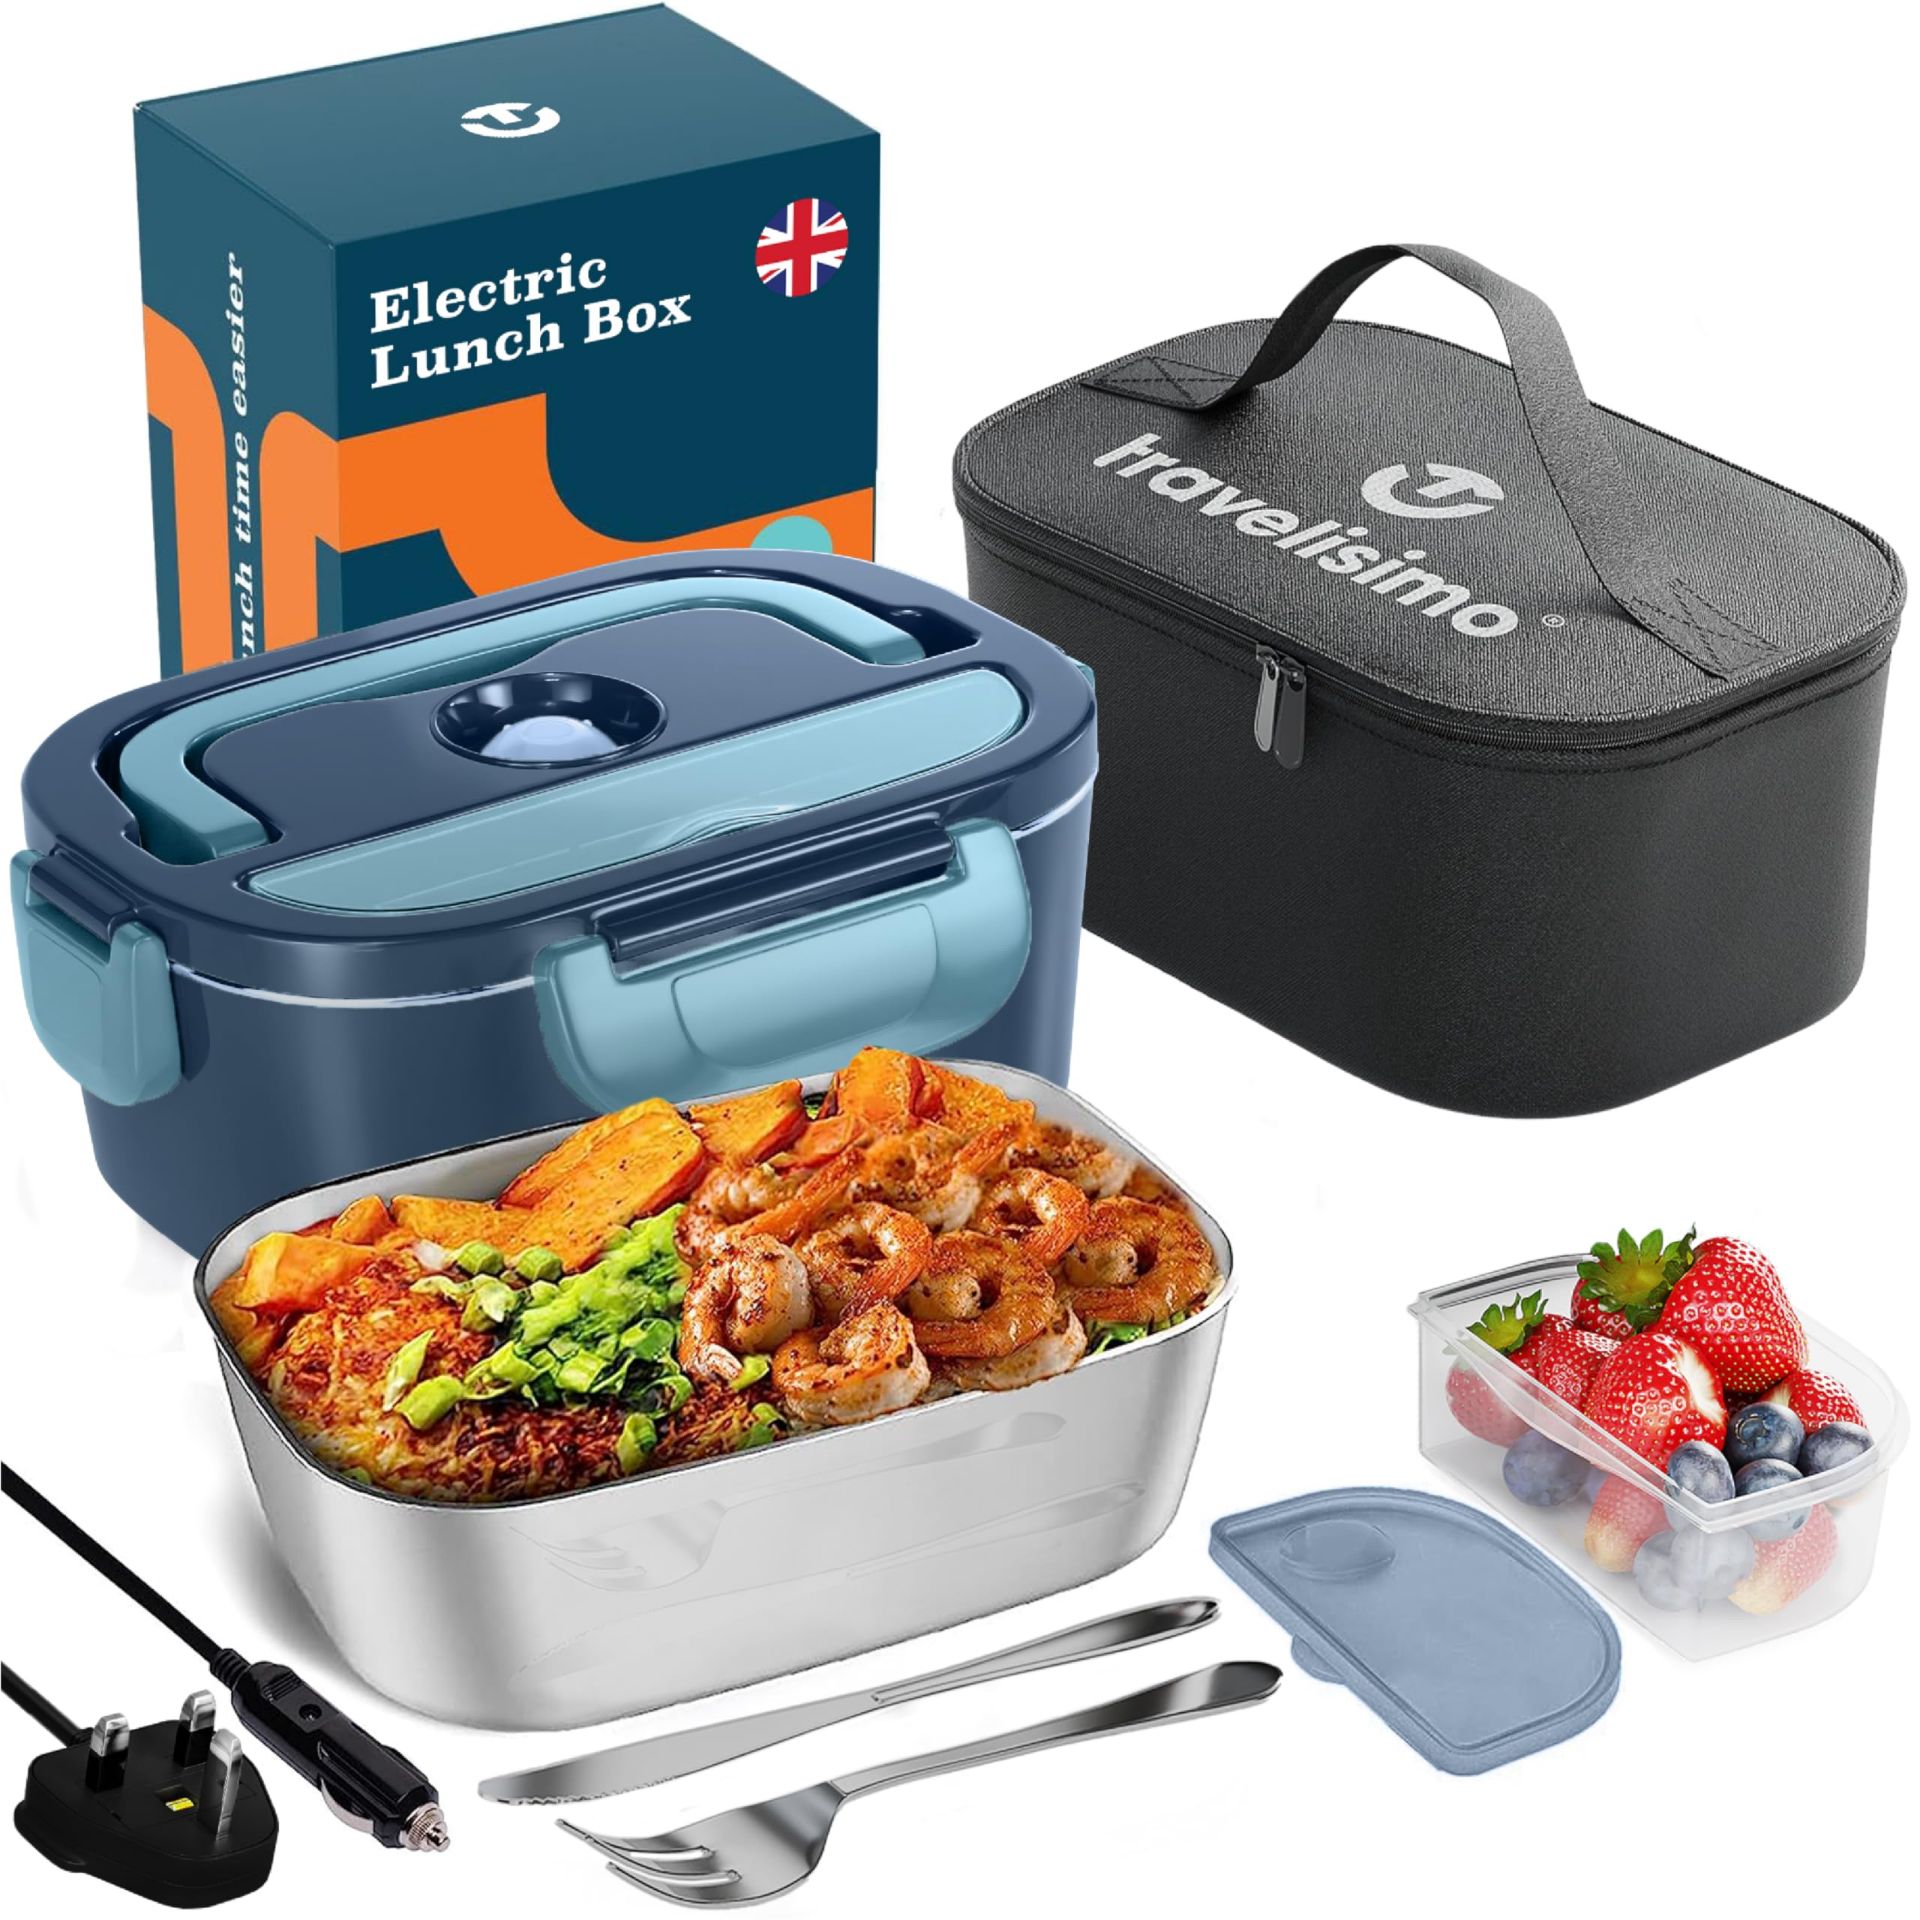 RRP £68.48 Total, Lot Consisting of 2 Items - See Description.